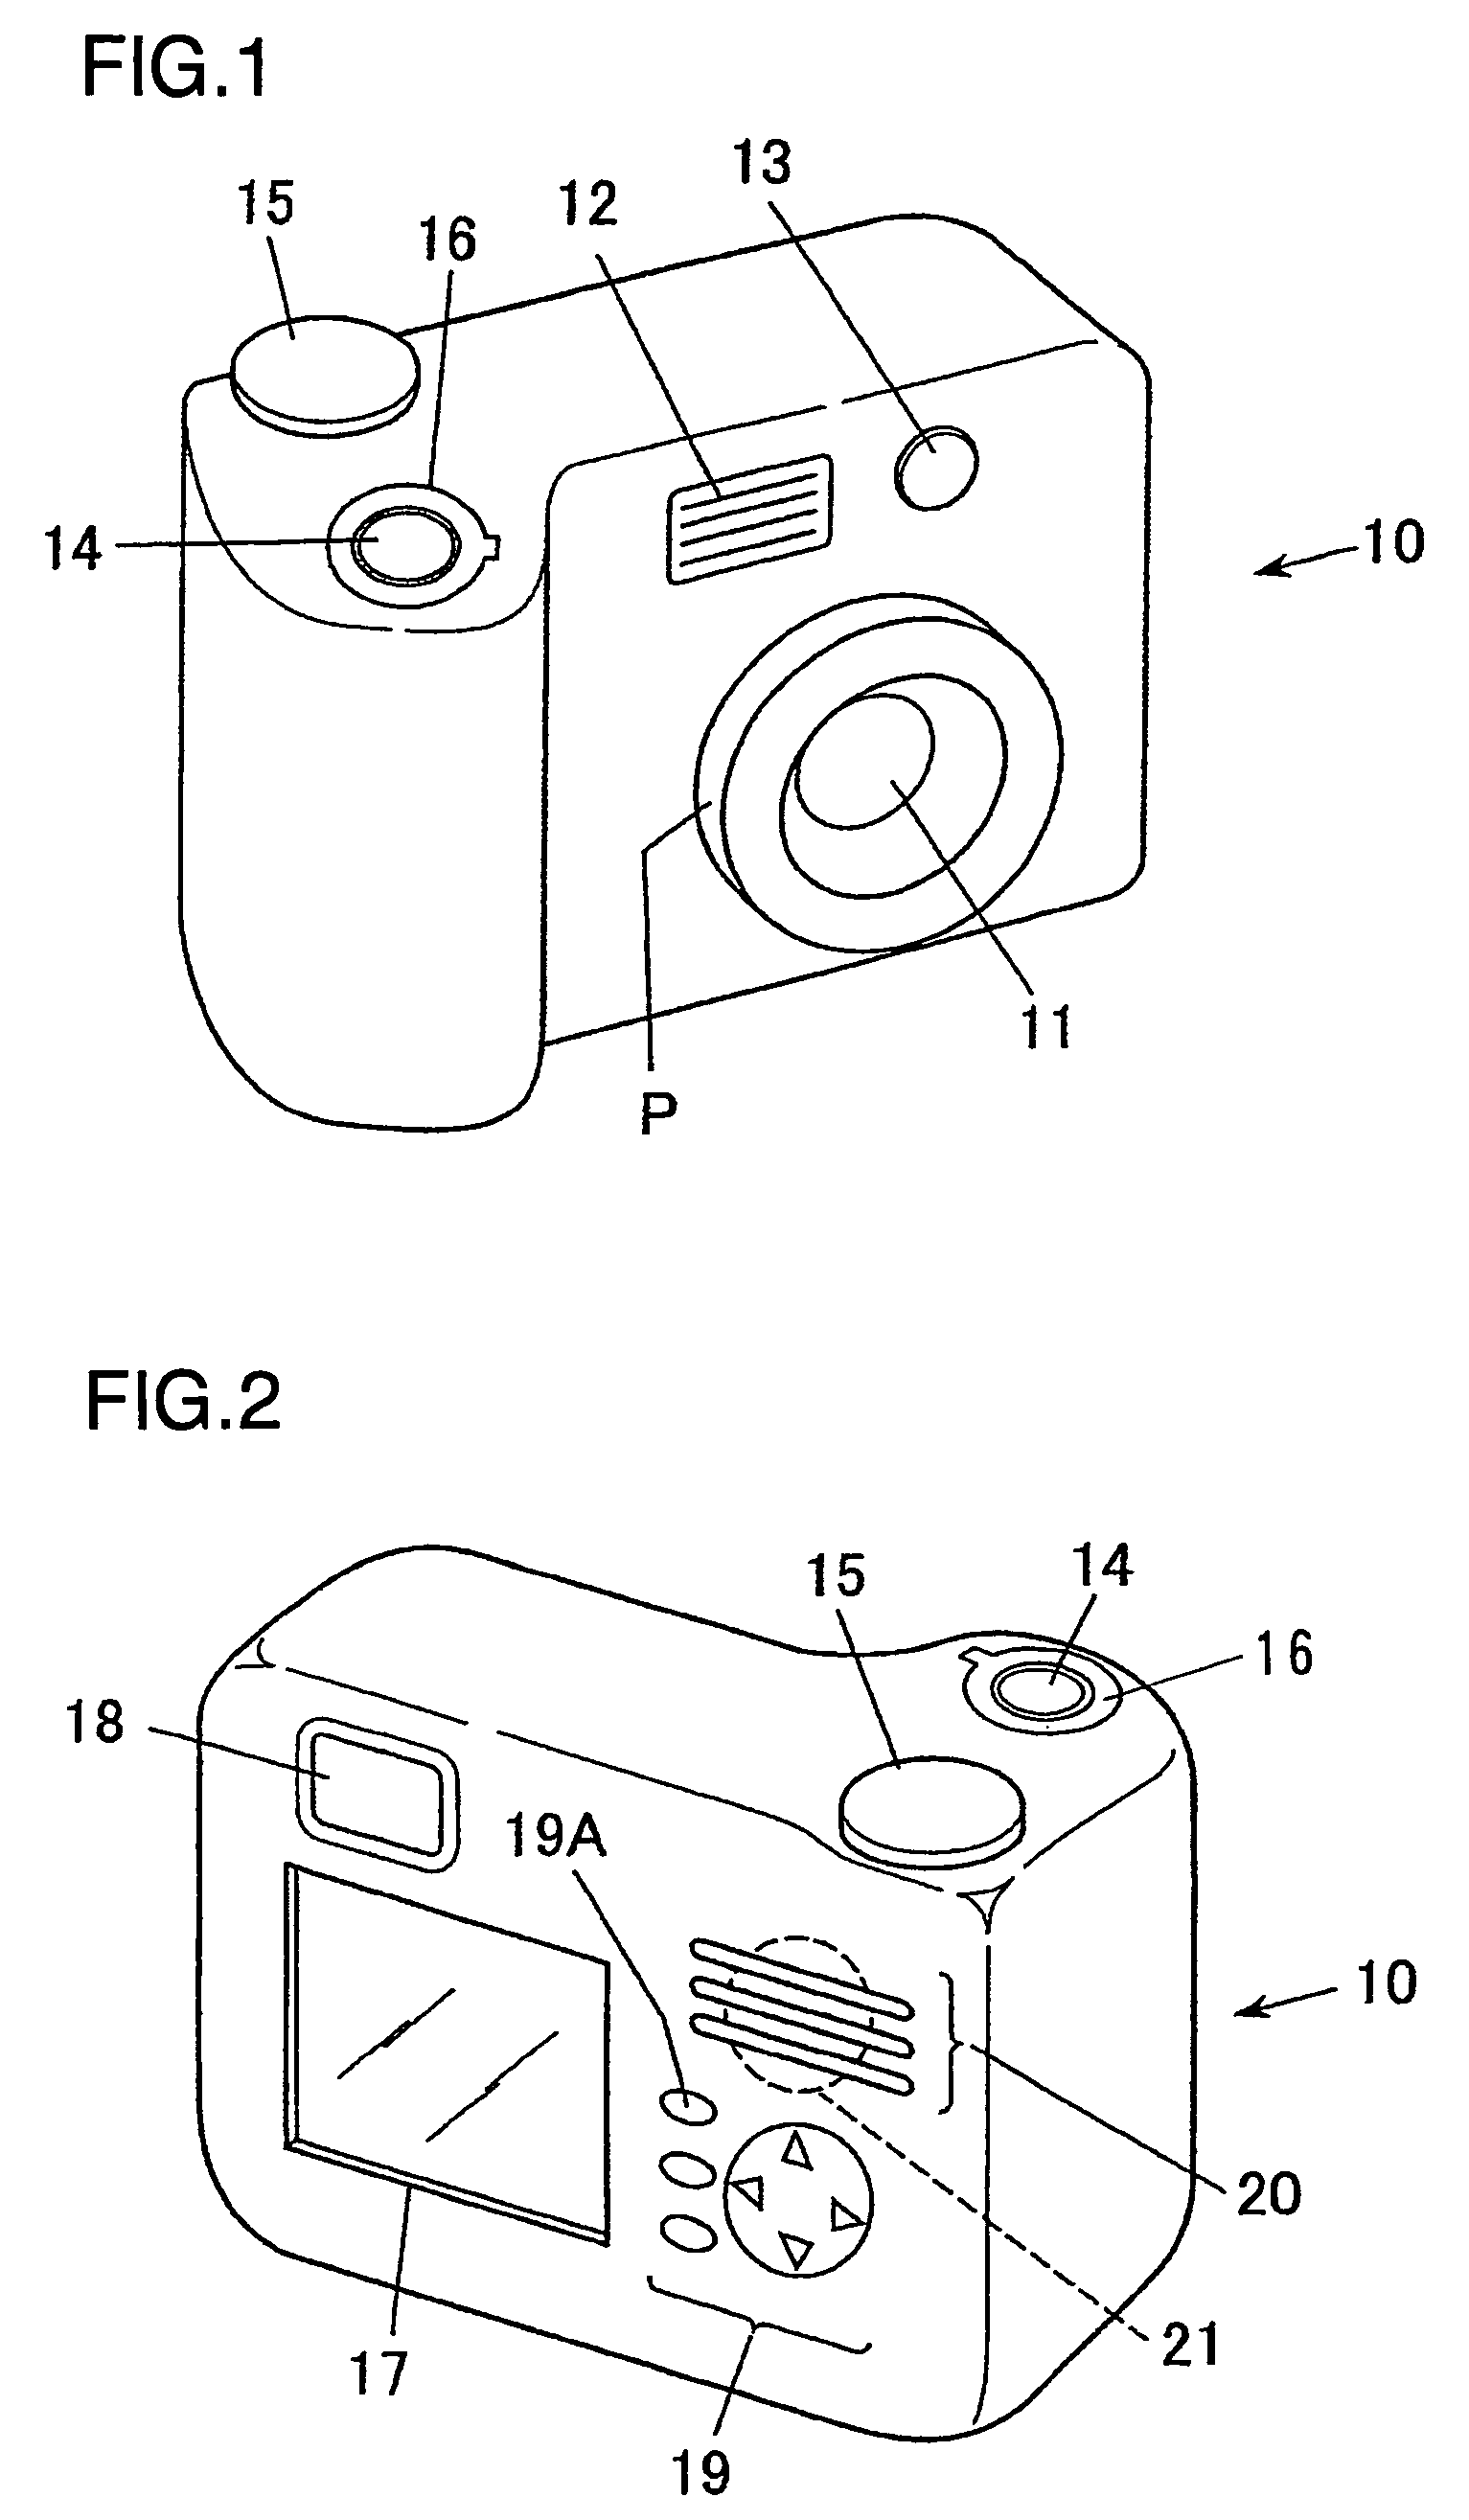 Digital camera with projector and digital camera system